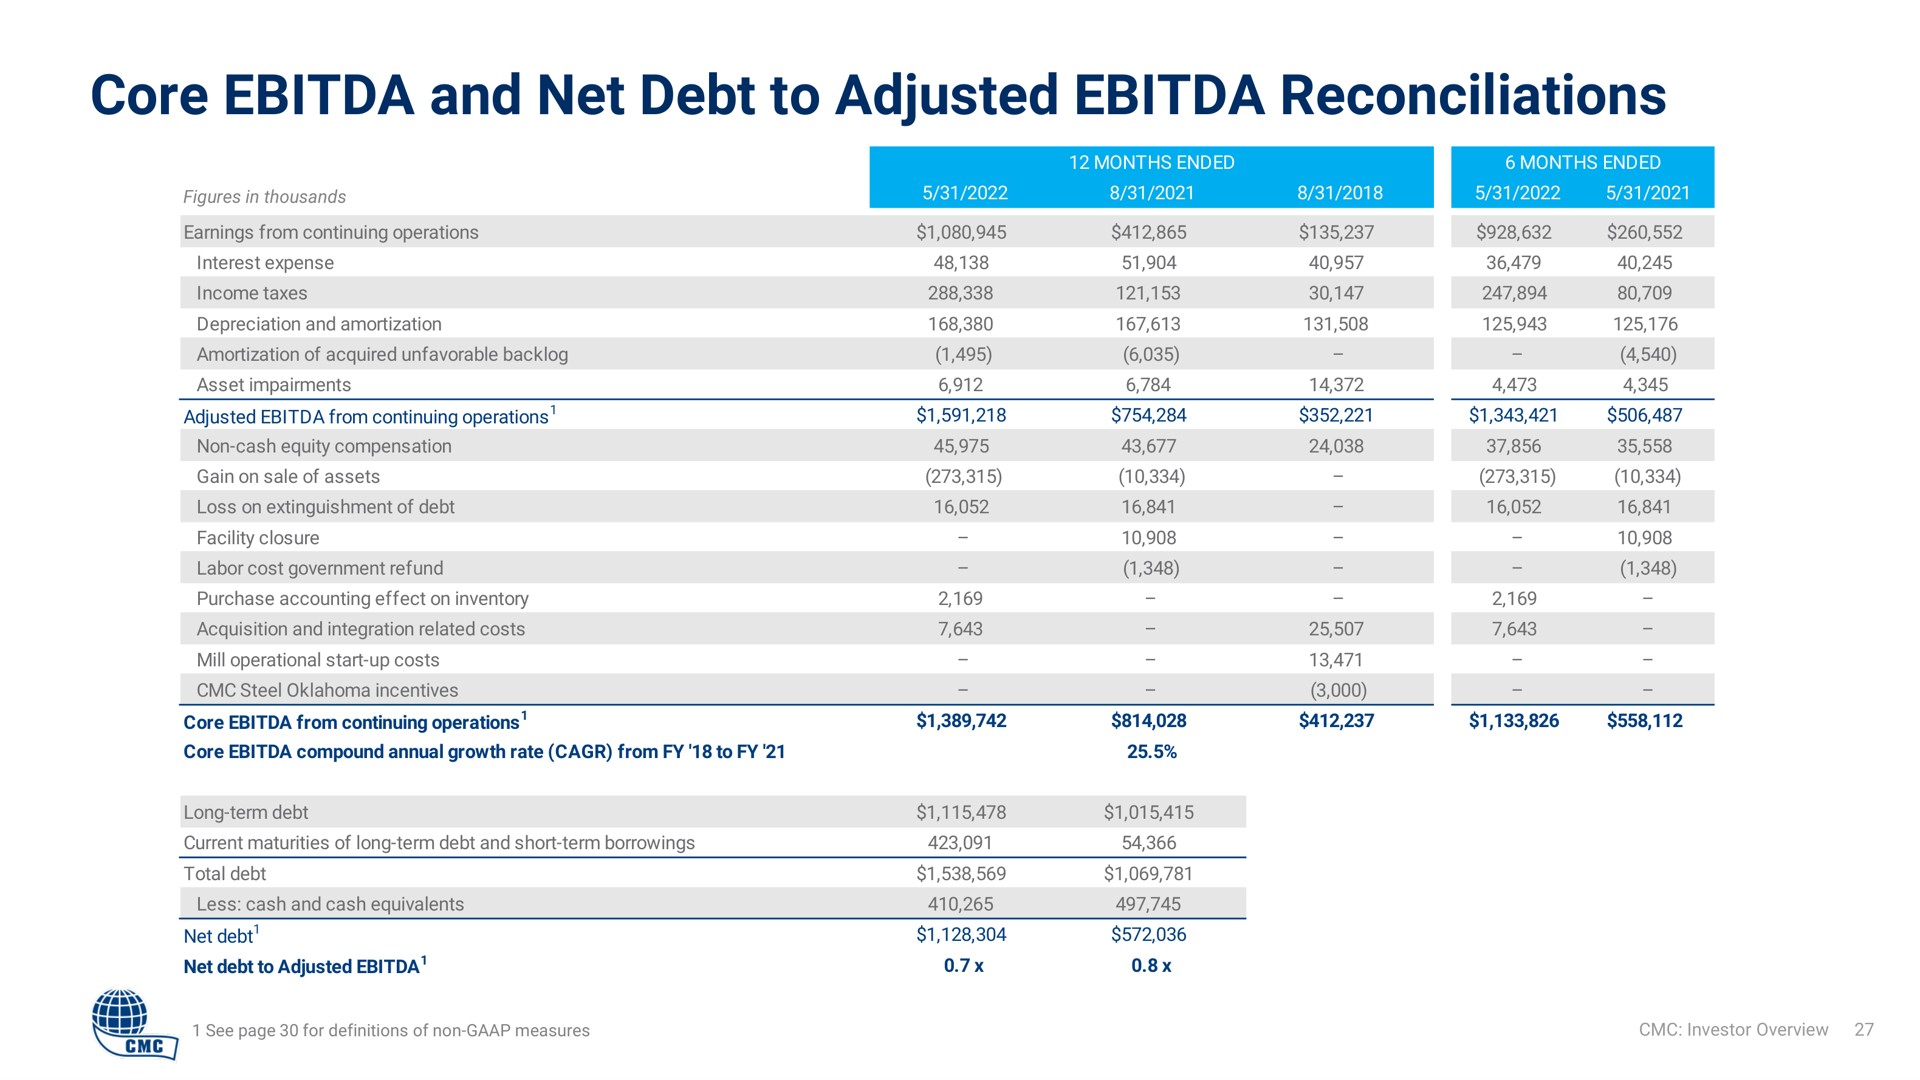 core and net debt to adjusted reconciliations | Commercial Metals Company